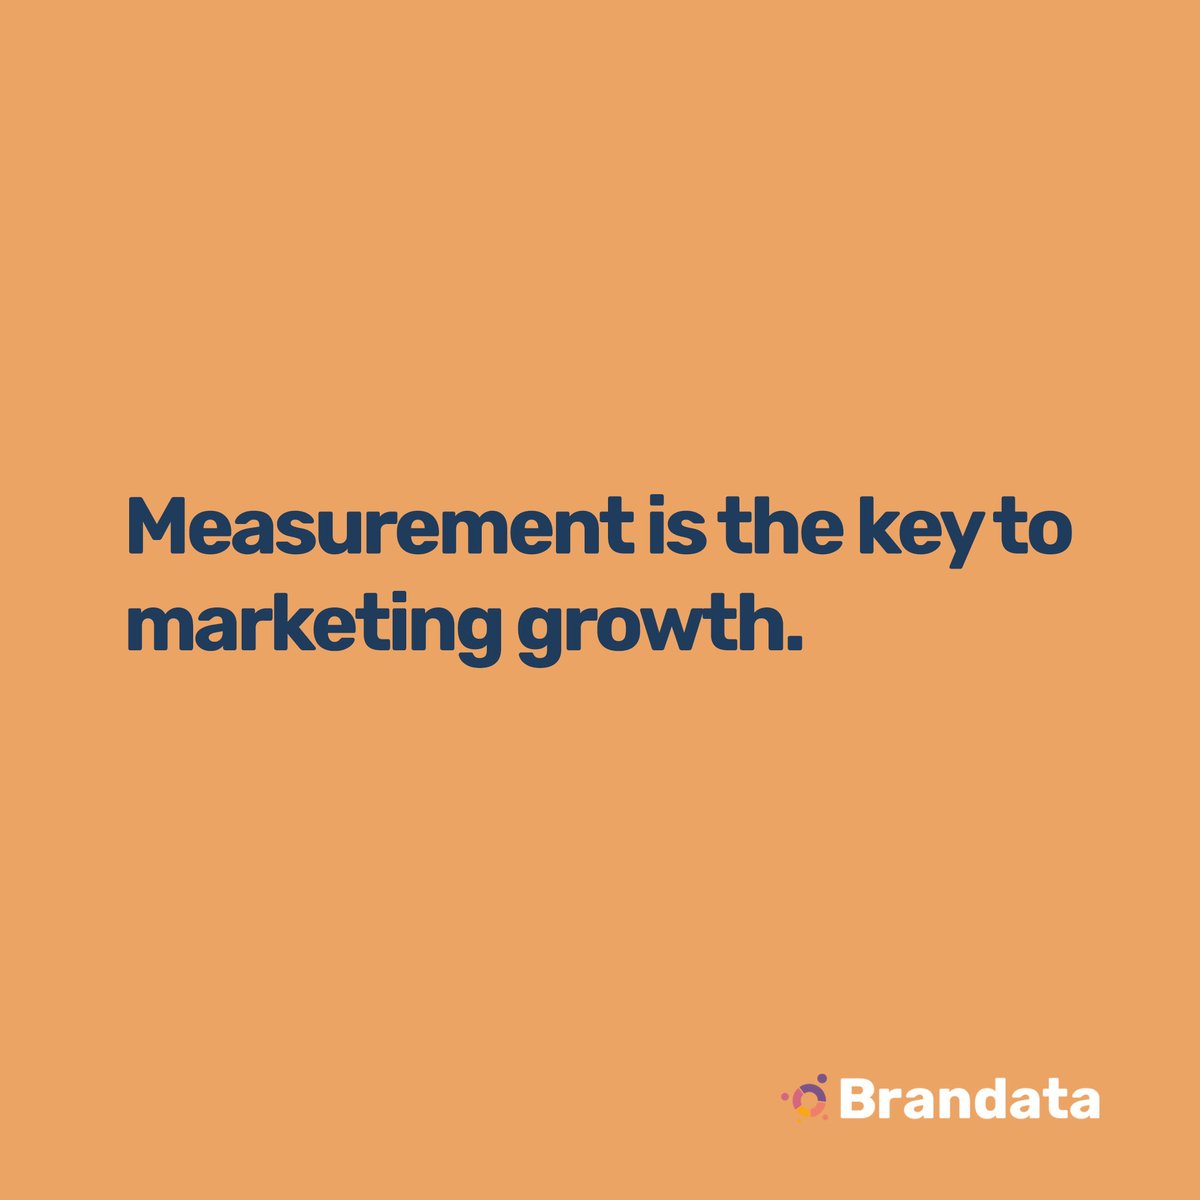 You can't improve what you aren't measuring. Implement a brand measurement program and start tracking metrics to grow your brand faster.

#marketinggrowth #measurement